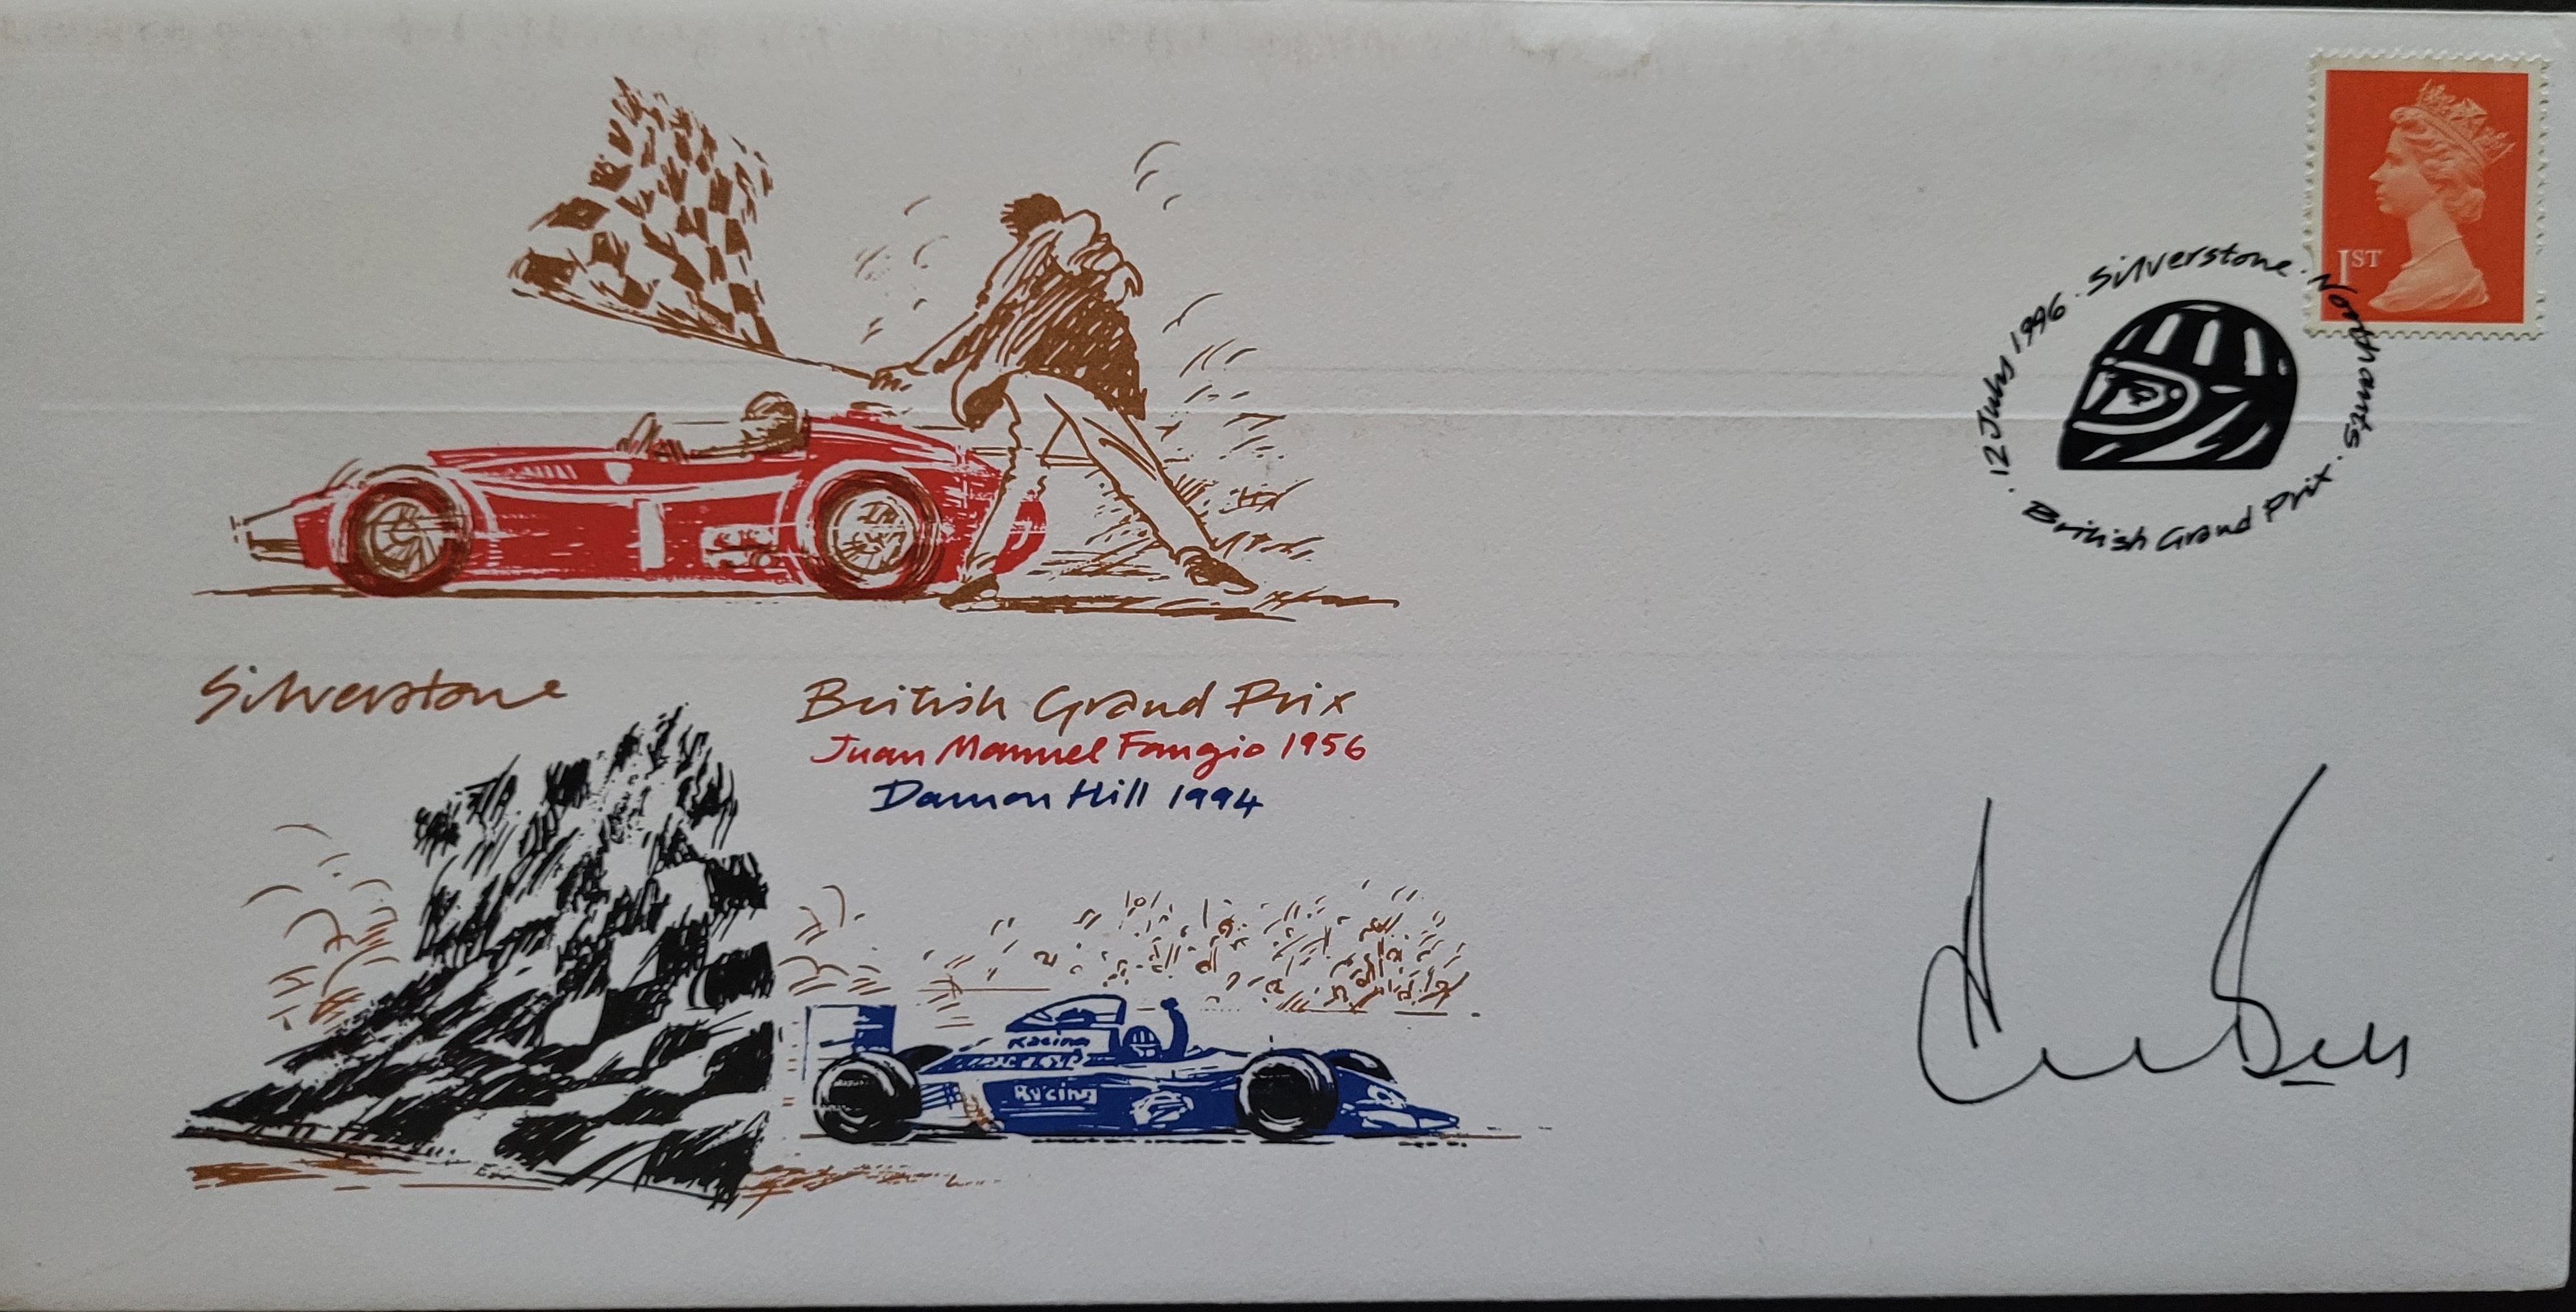 1996 SILVERSTONE MOTOR RACING LTD EDITION POSTAL COVER AUTOGRAPHED BY DEREK BELL